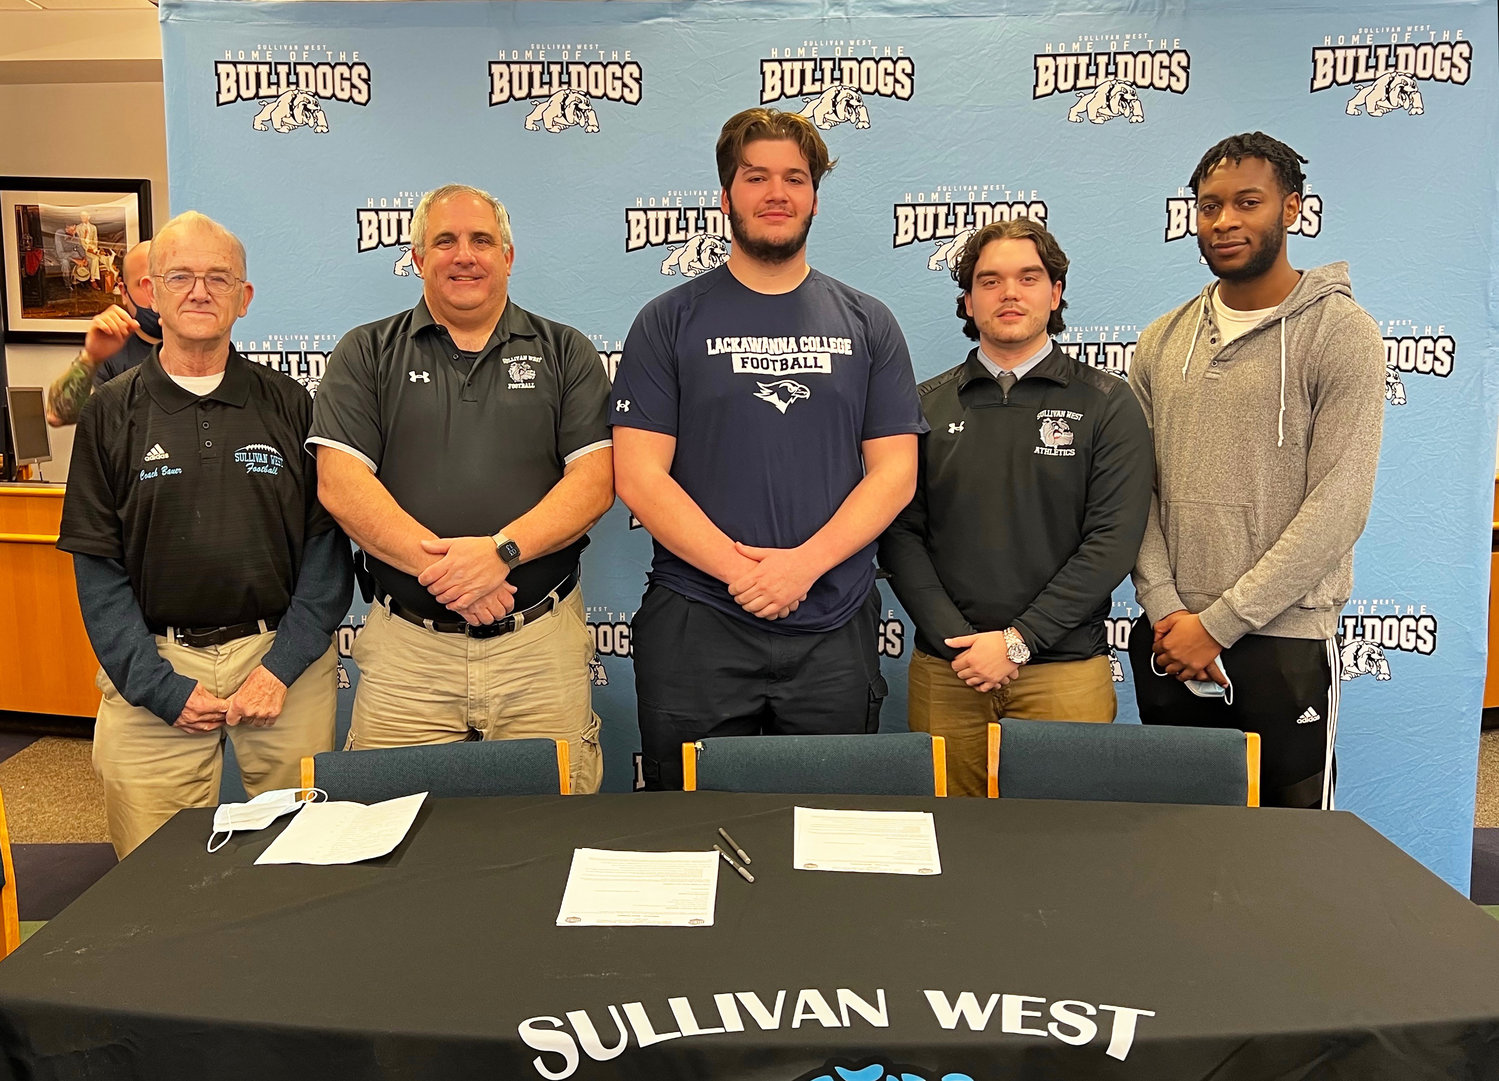 Chris Campanelli, center, is joined by his football coaches (left to right) Ron Bauer, John Hauschild, Justin Diehl and Ronj Padu.